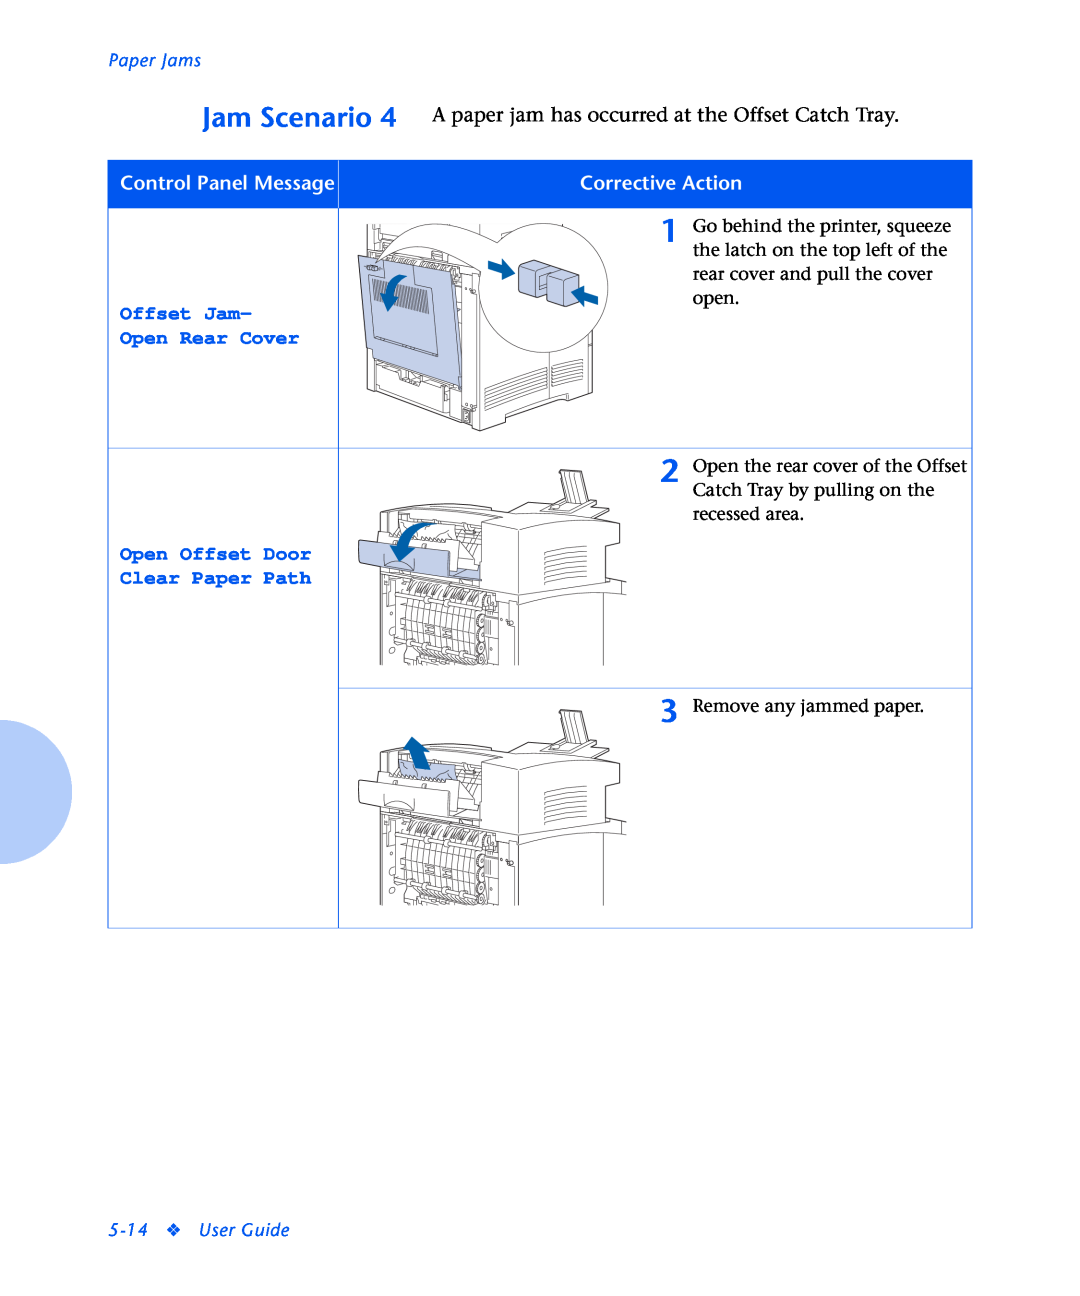 Xerox N2125 manual Jam Scenario, A paper jam has occurred at the Offset Catch Tray, Offset Jam Open Rear Cover, Paper Jams 